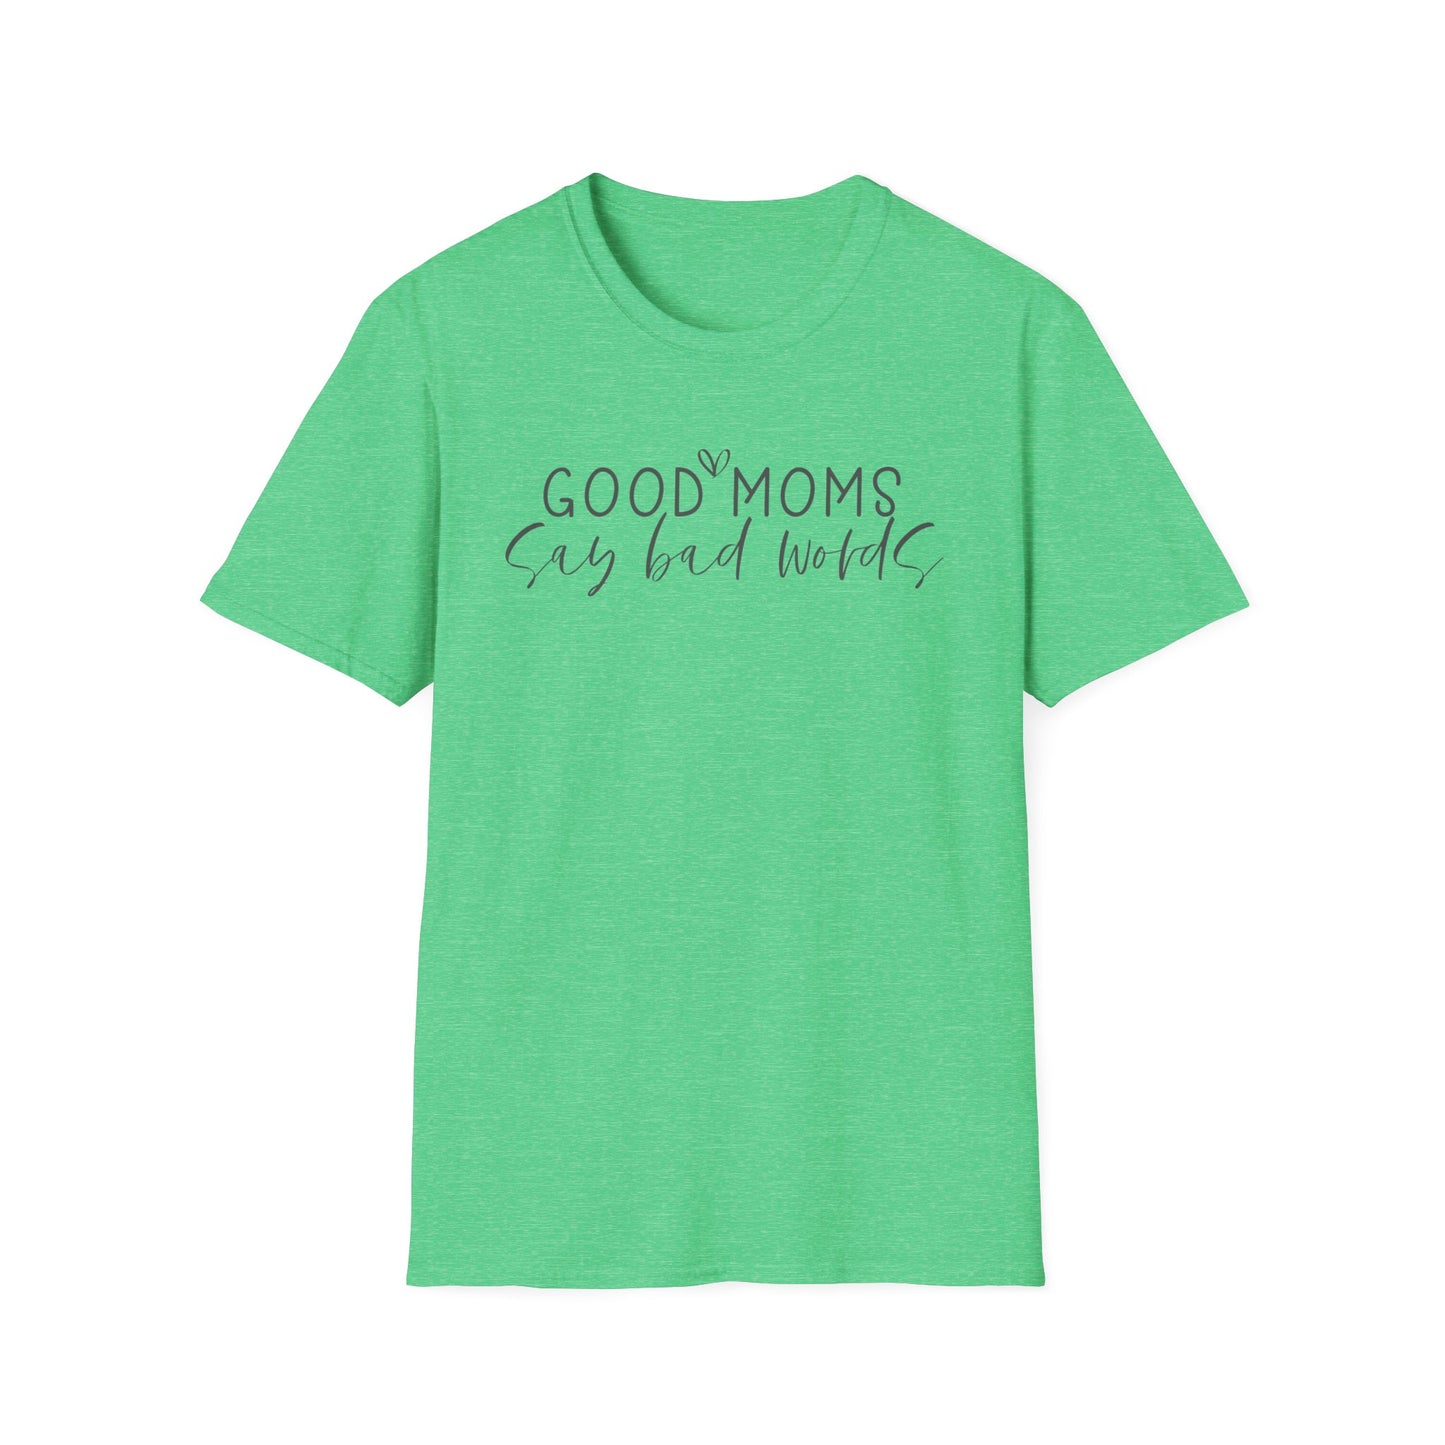 Good Moms Say Bad Words - Unisex Softstyle T-Shirt